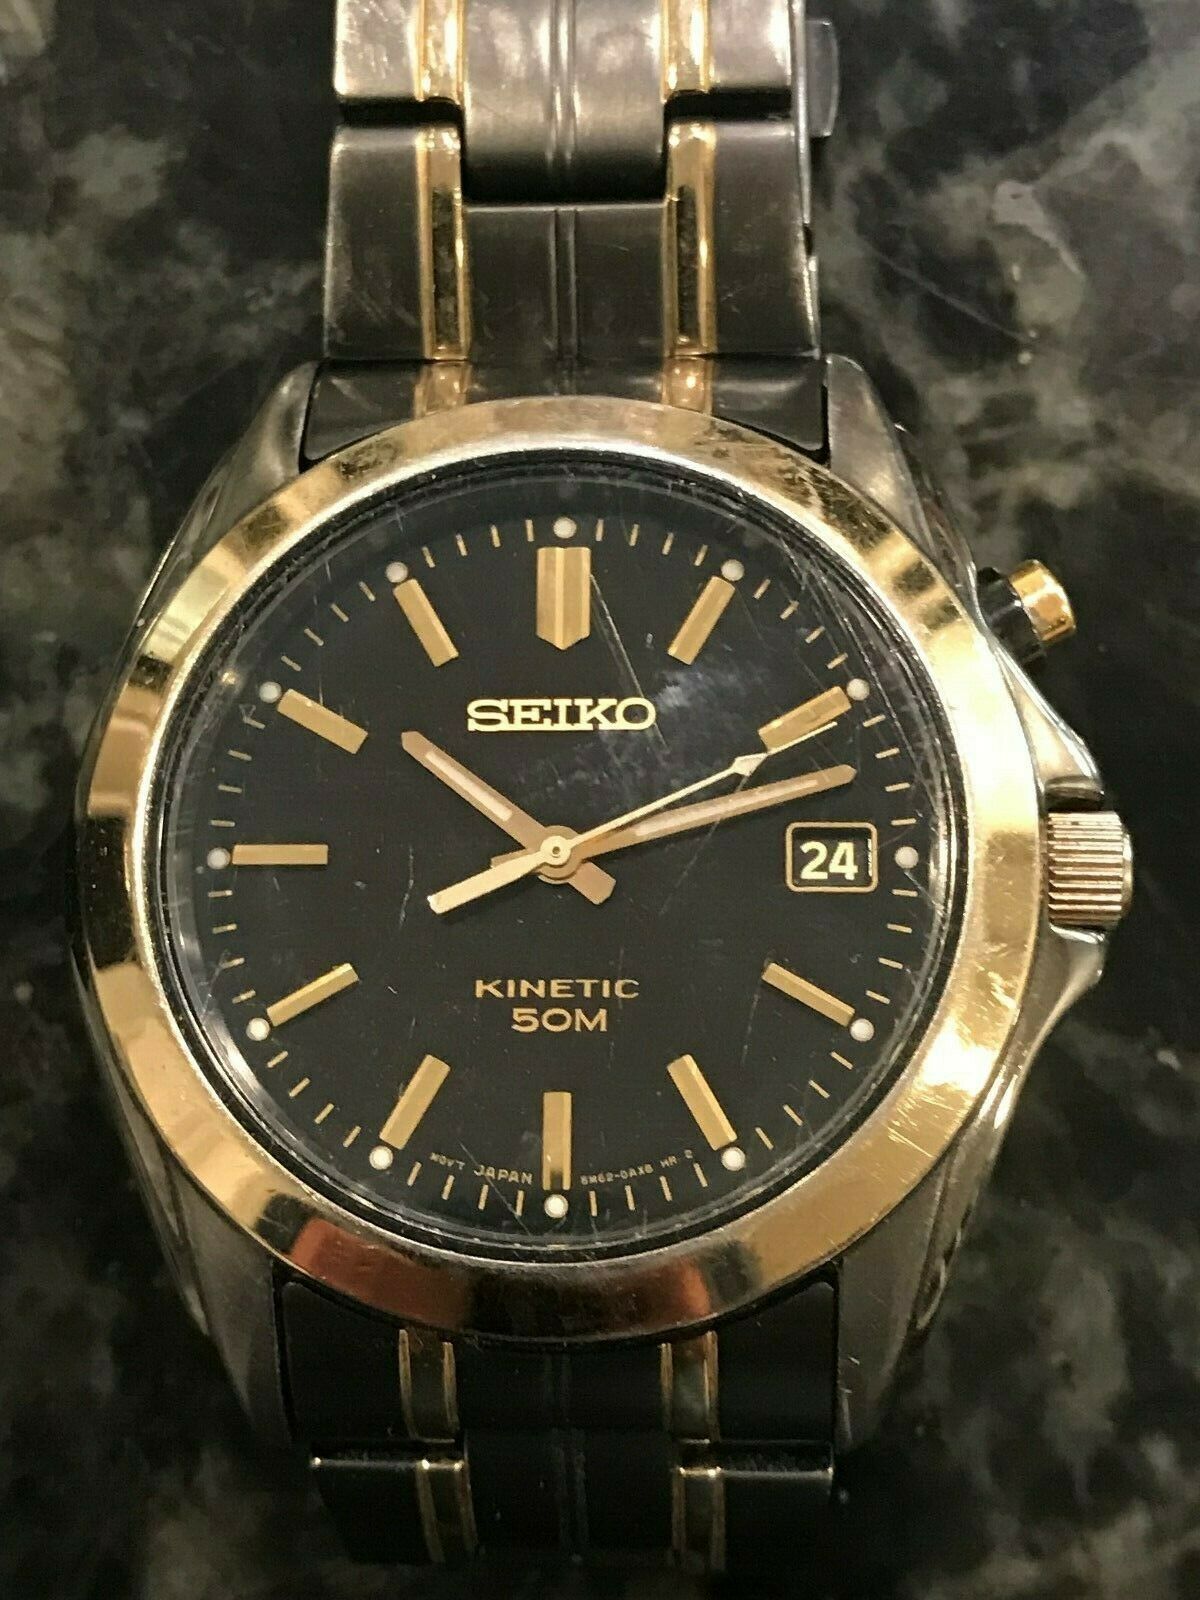 Seiko kinetic 50m 5M62 two toned gold/black watch | WatchCharts